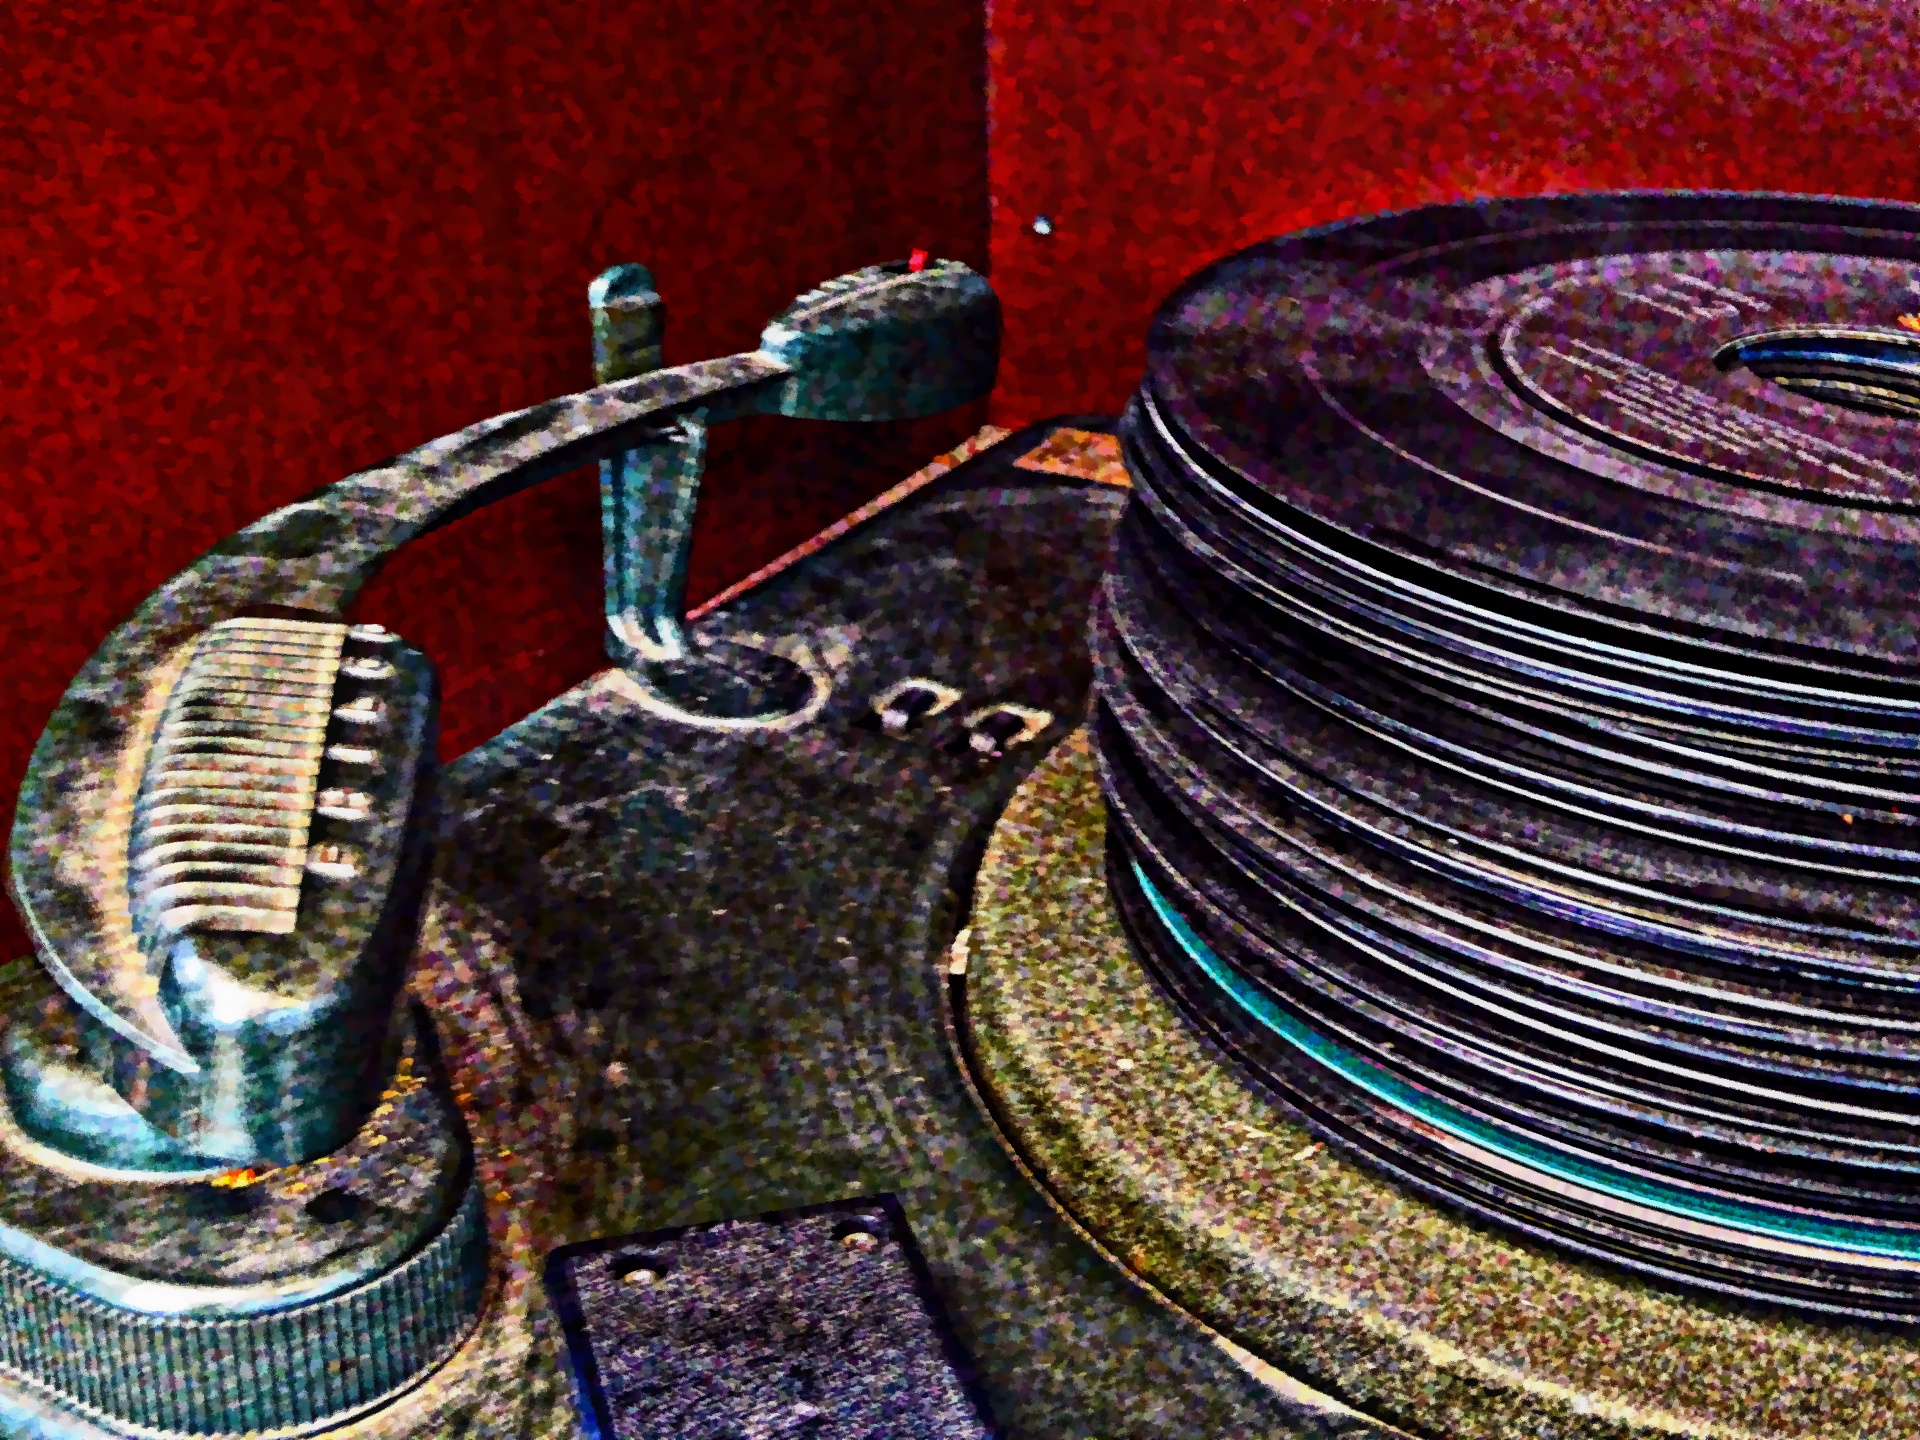 artistic effect applied to photo of a pile of 45 RPM records next to dusty turntable arm